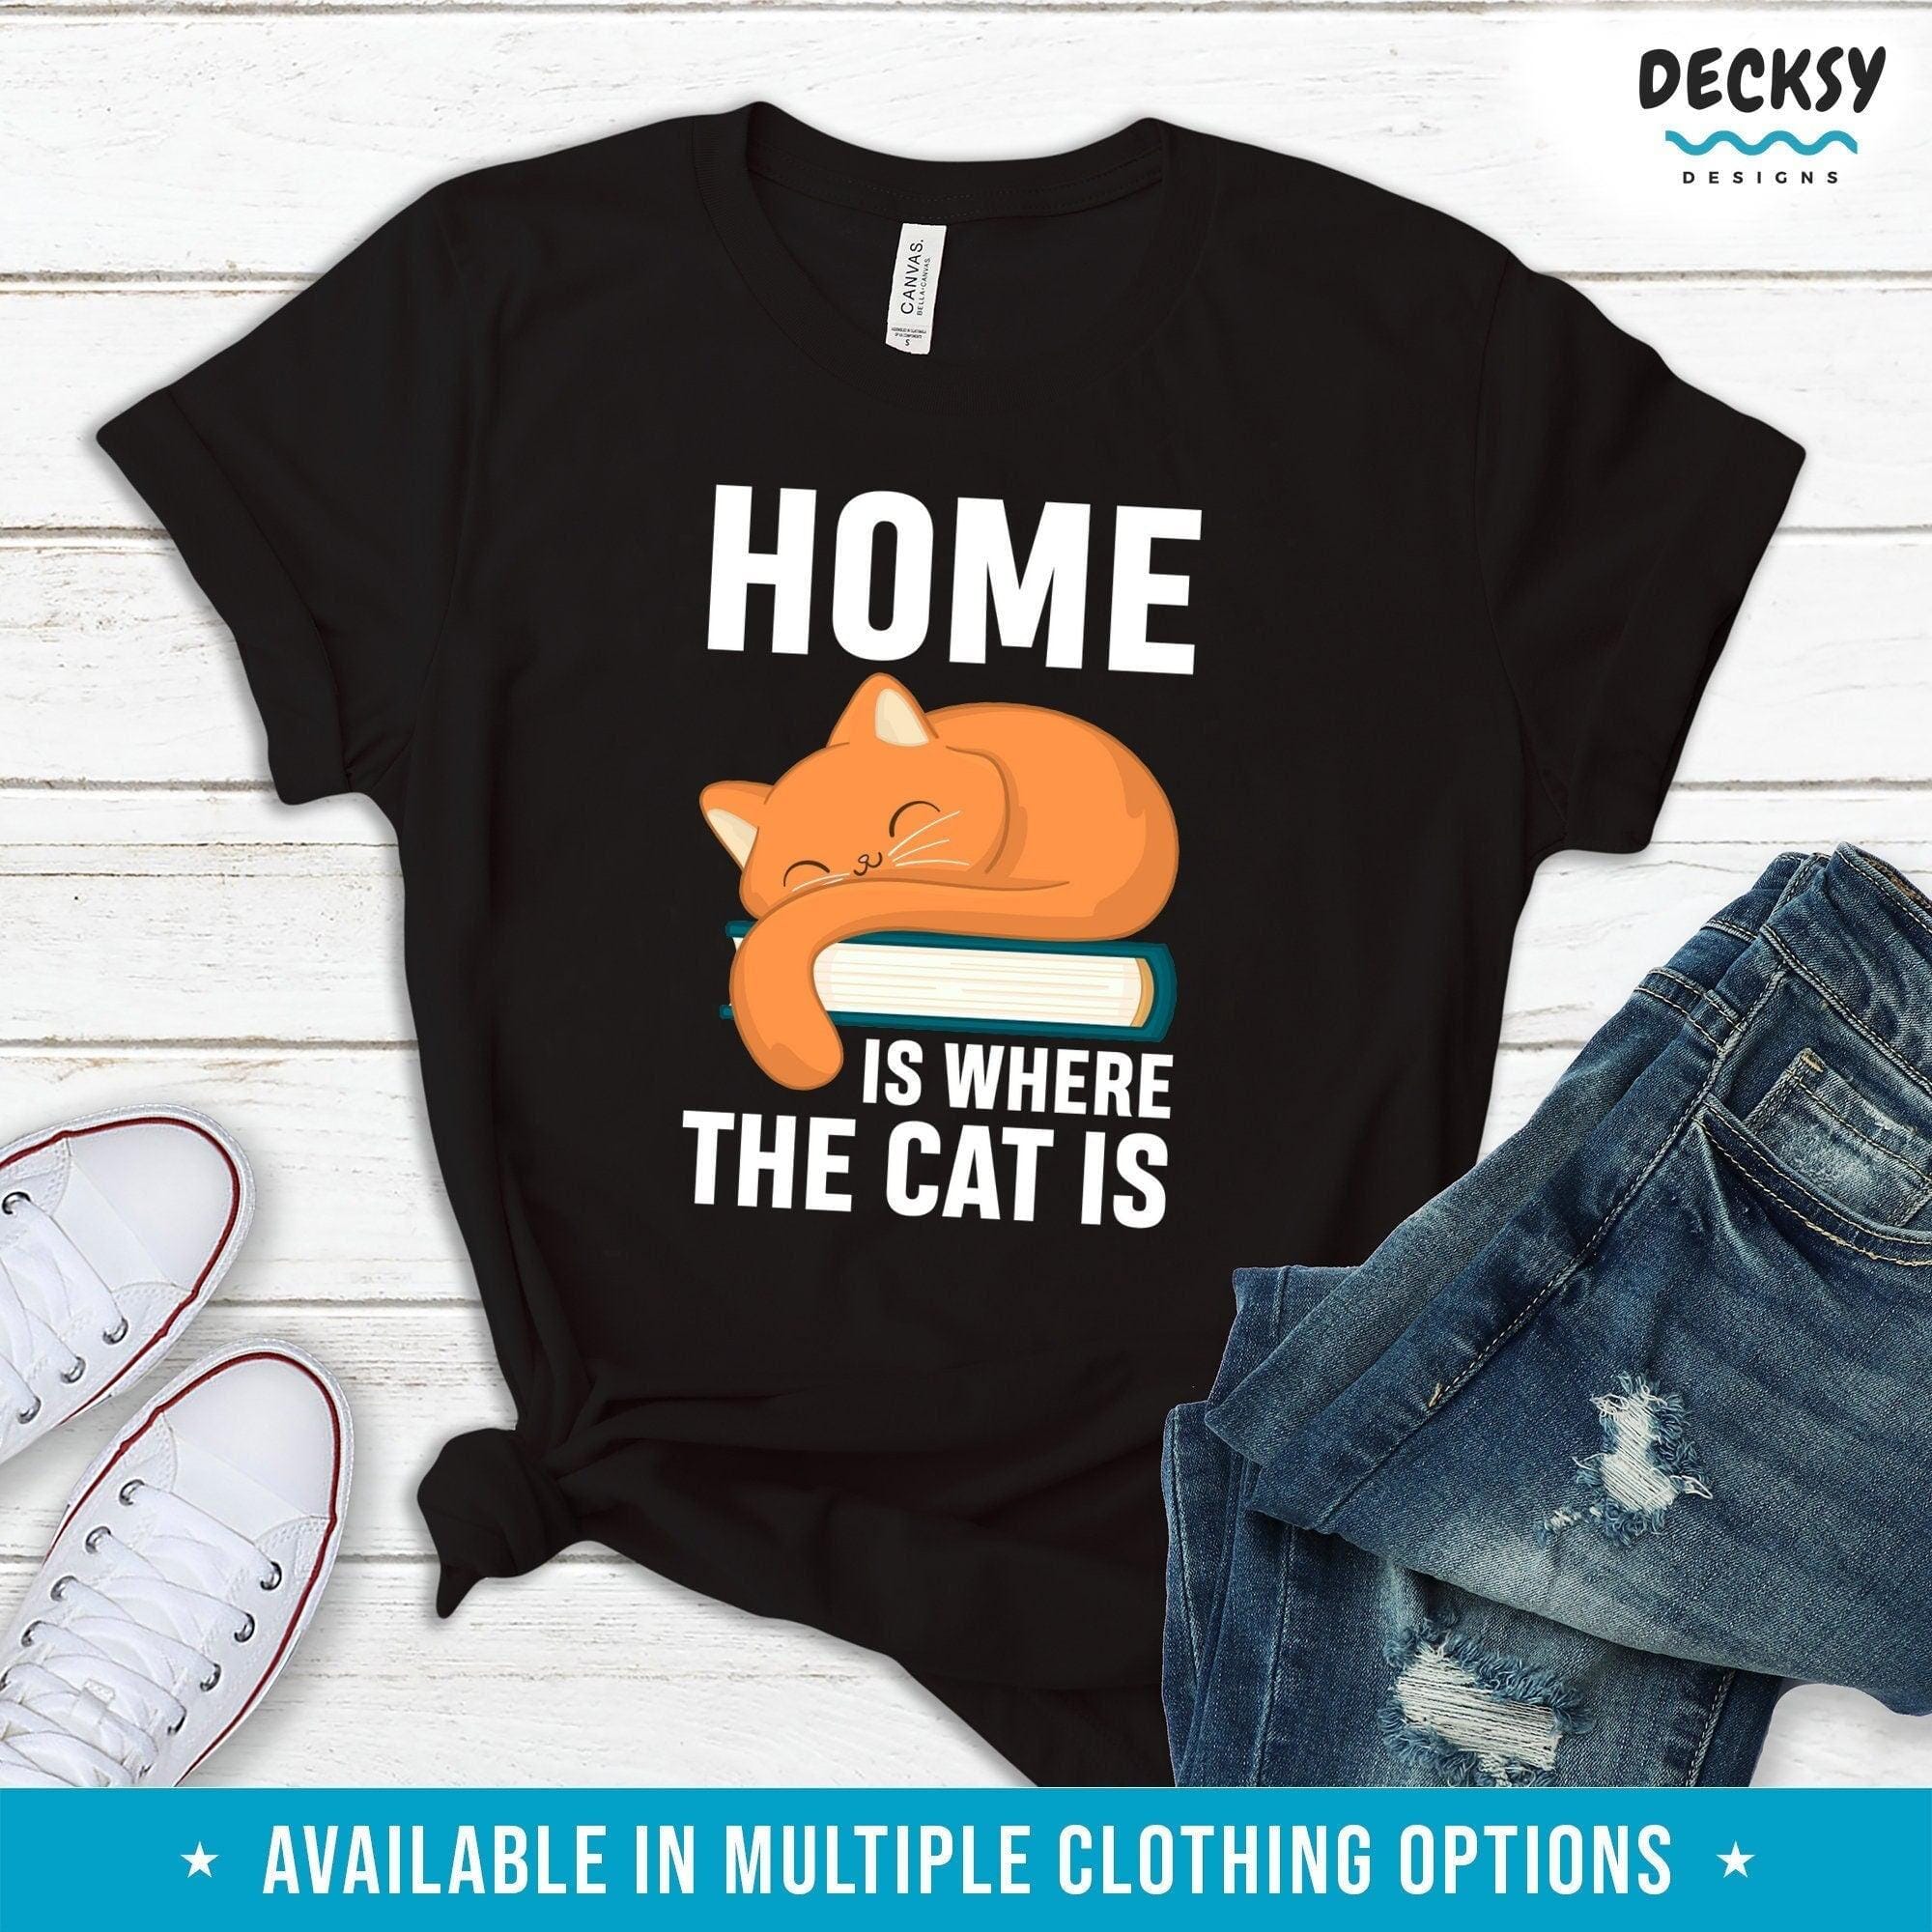 Cat Lover T-Shirt, Gift For Cat Owner-Clothing:Gender-Neutral Adult Clothing:Tops & Tees:T-shirts:Graphic Tees-DecksyDesigns